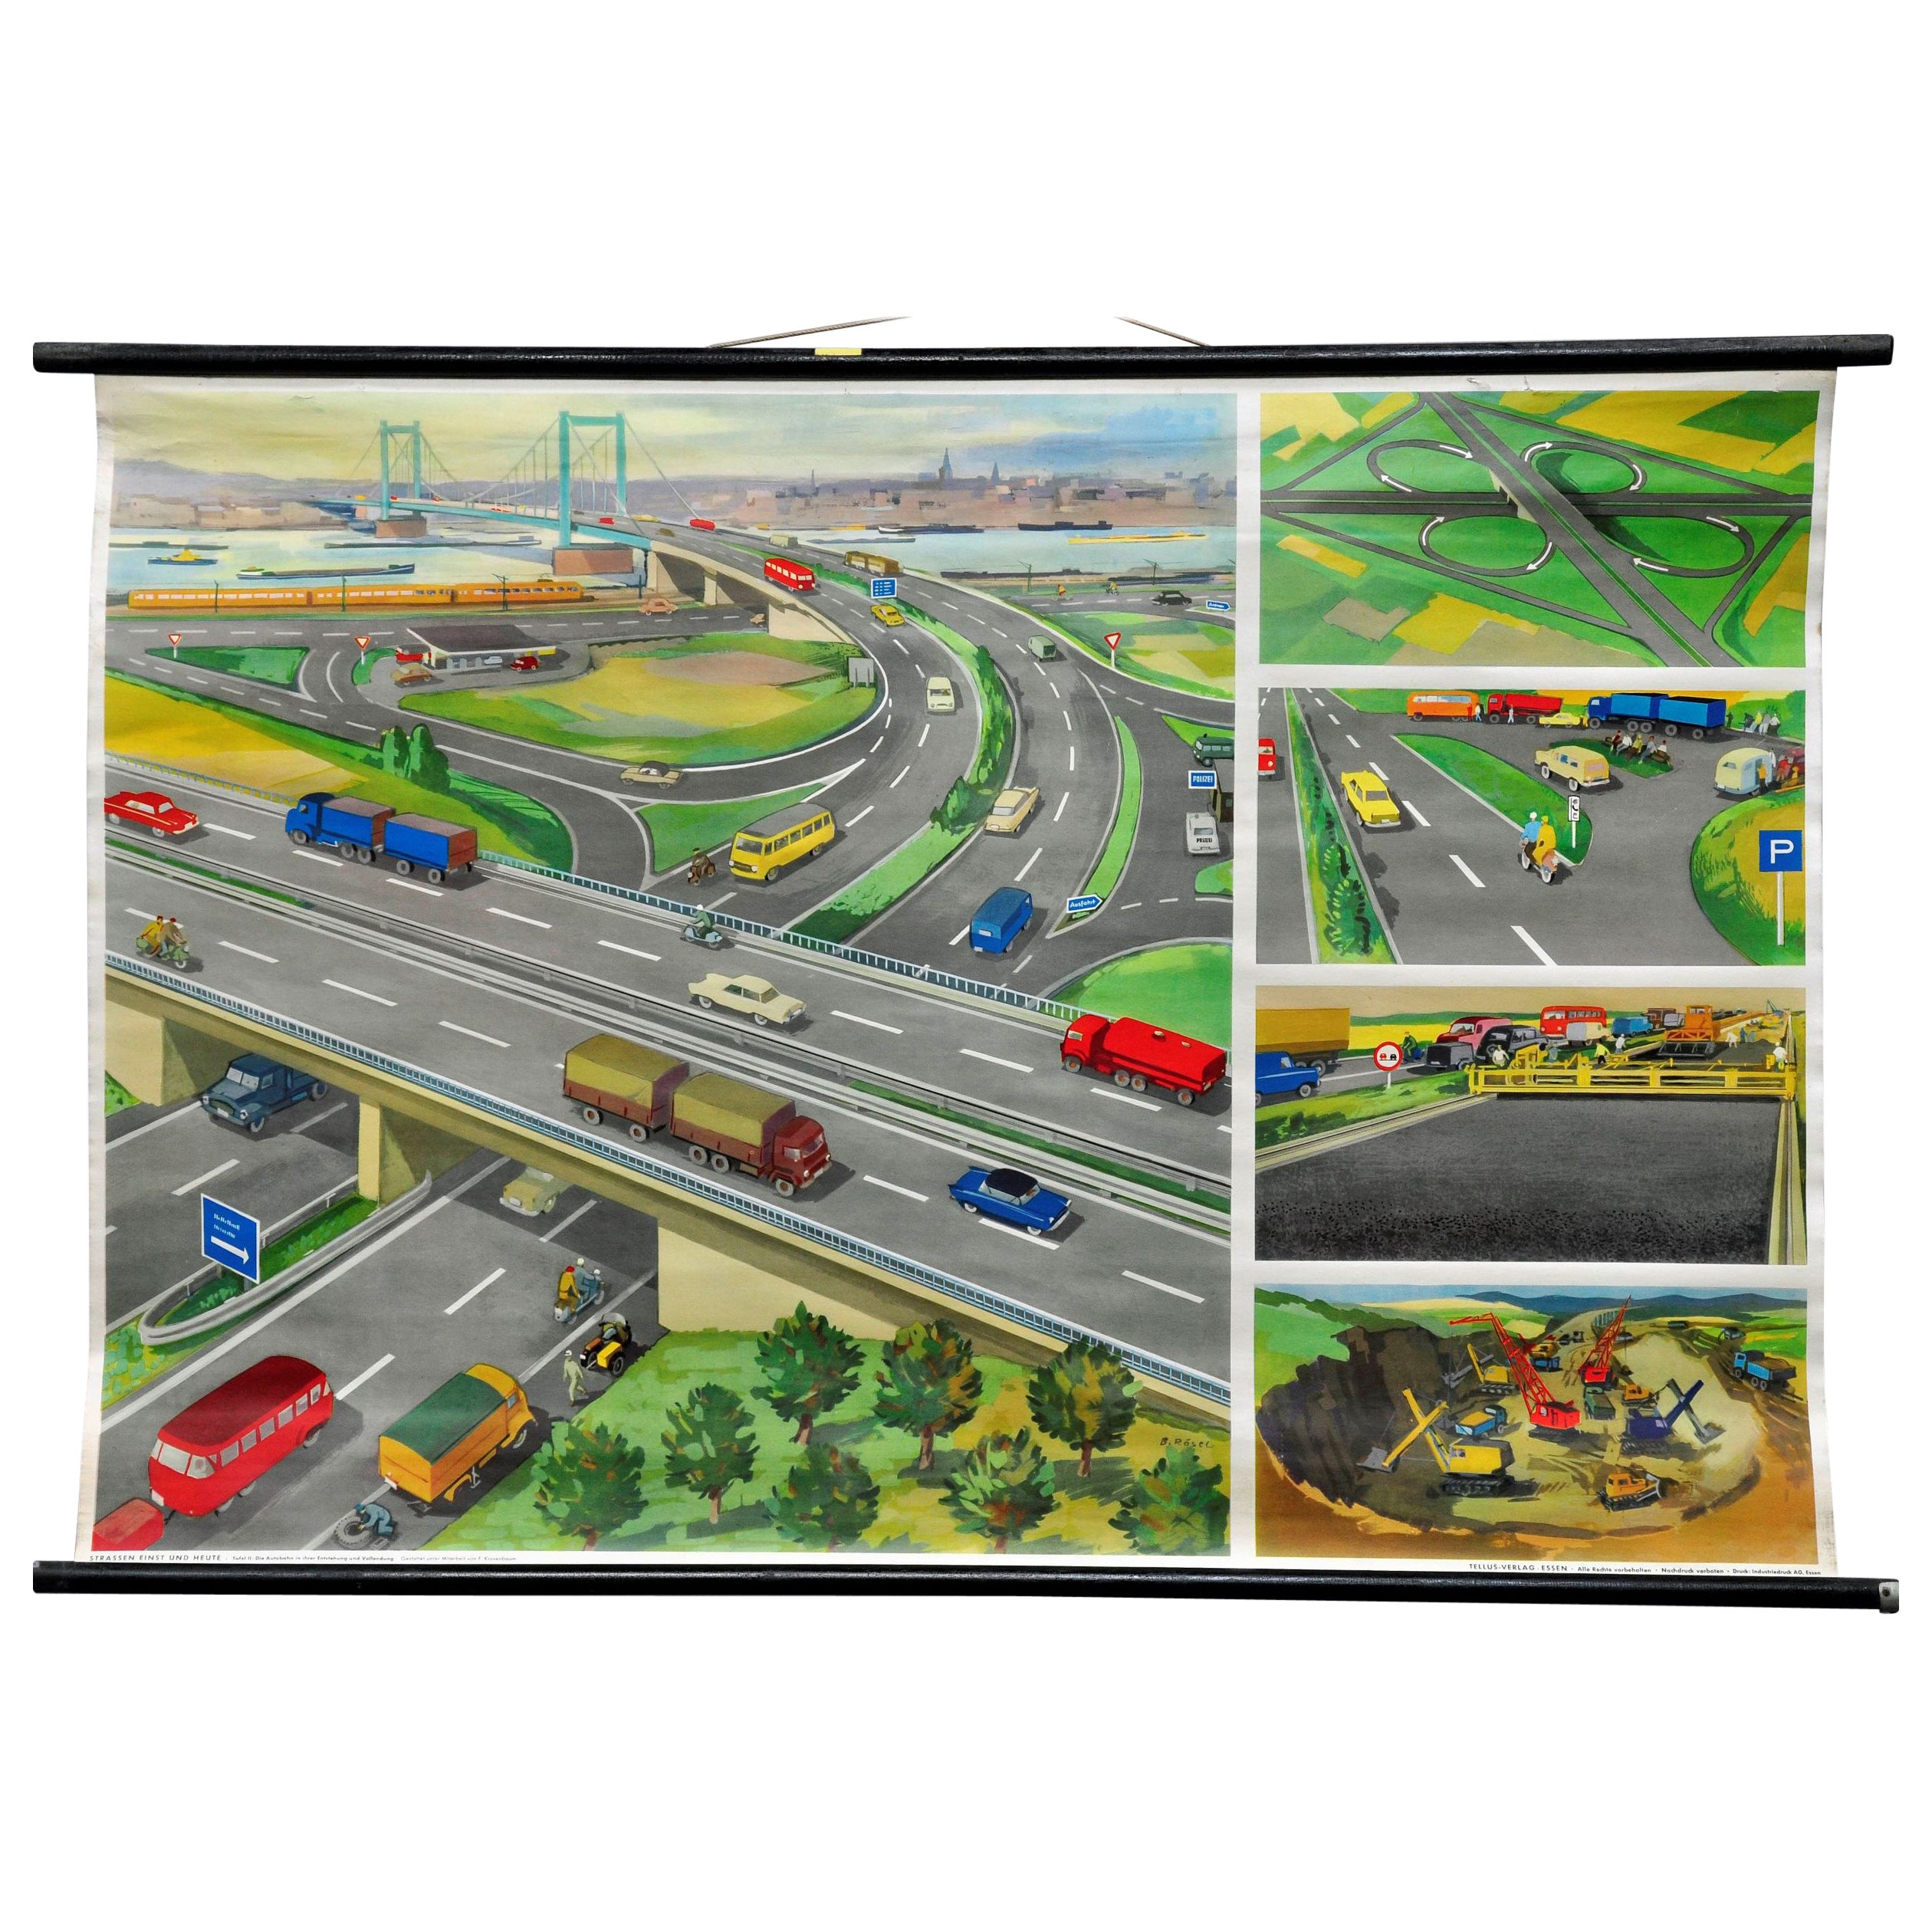 Vintage Rollable Wall Chart Freeway Interchange Highway Junction Traffic Poster